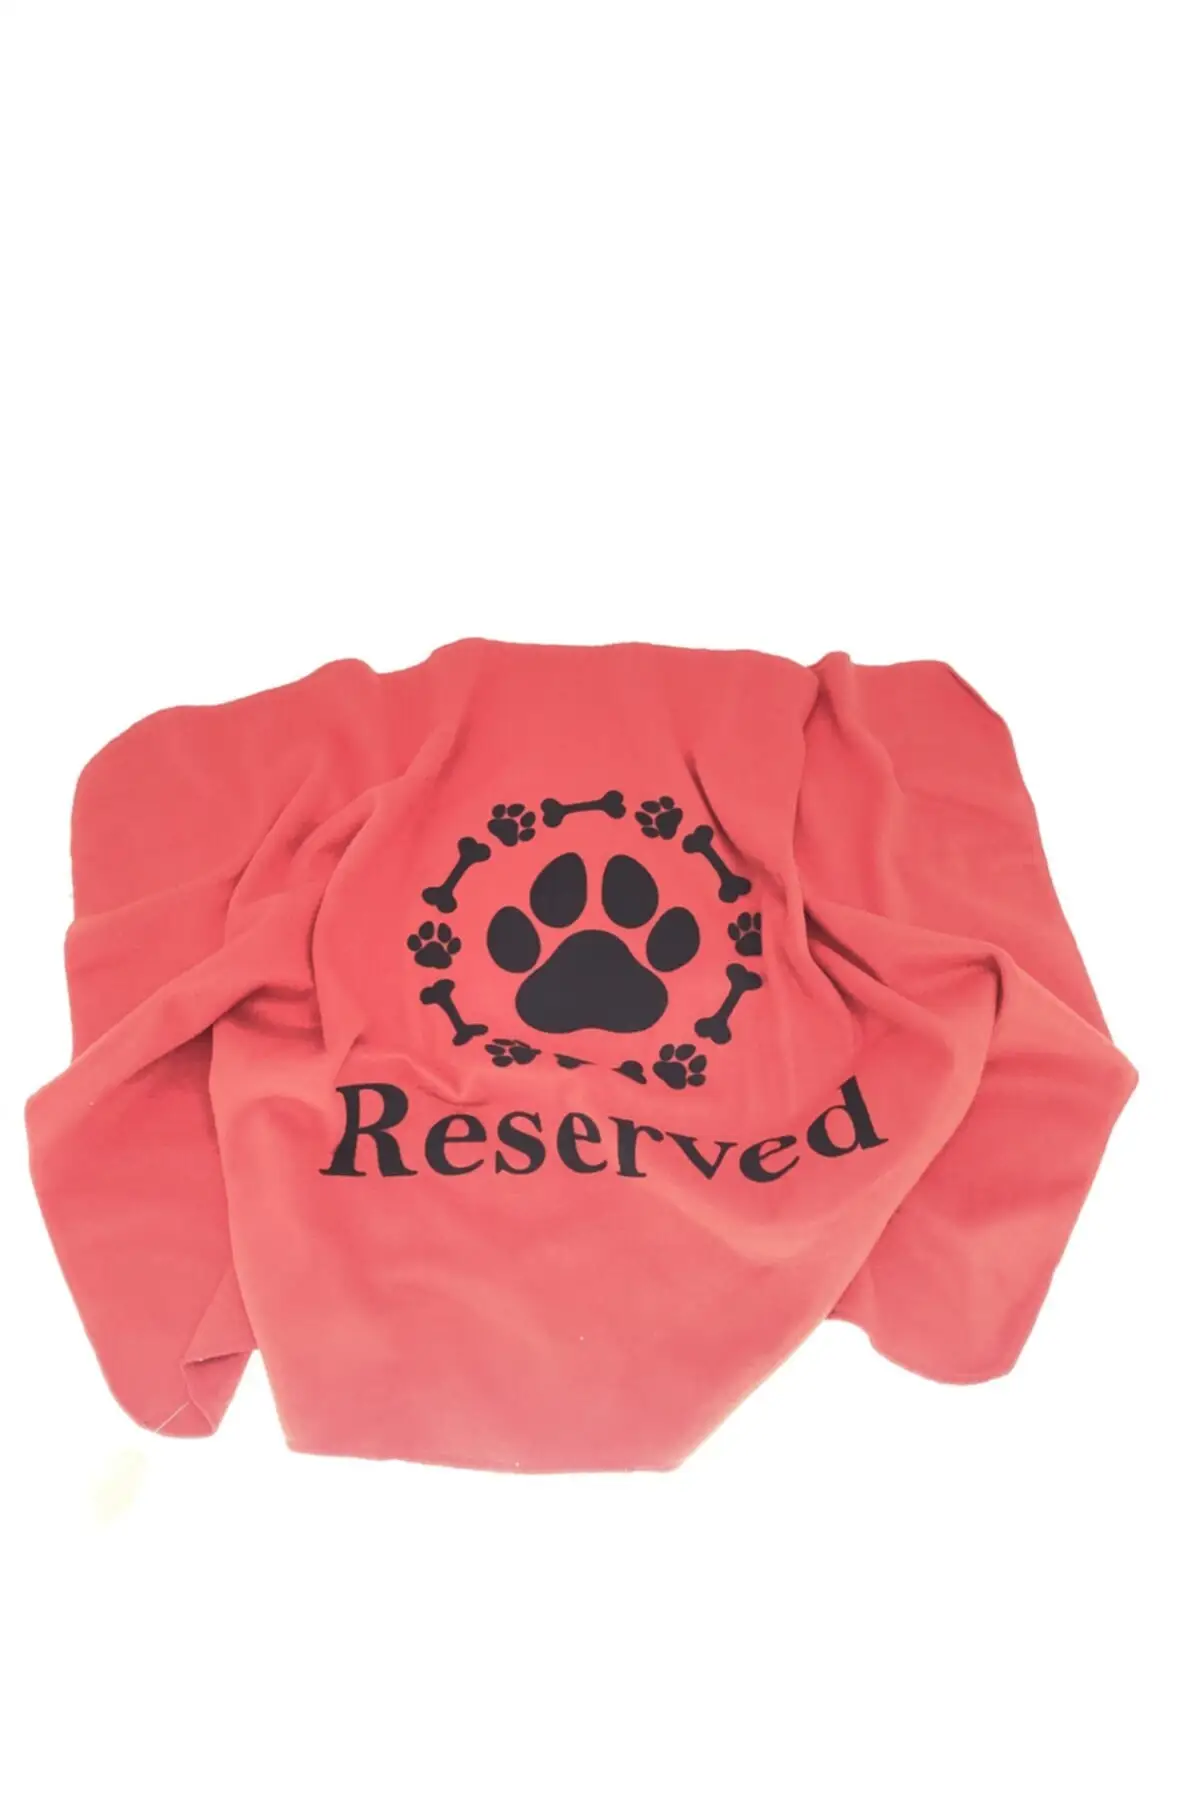 Reserved Dog-Cat Blanket 65X100 Dimensions Machine washable